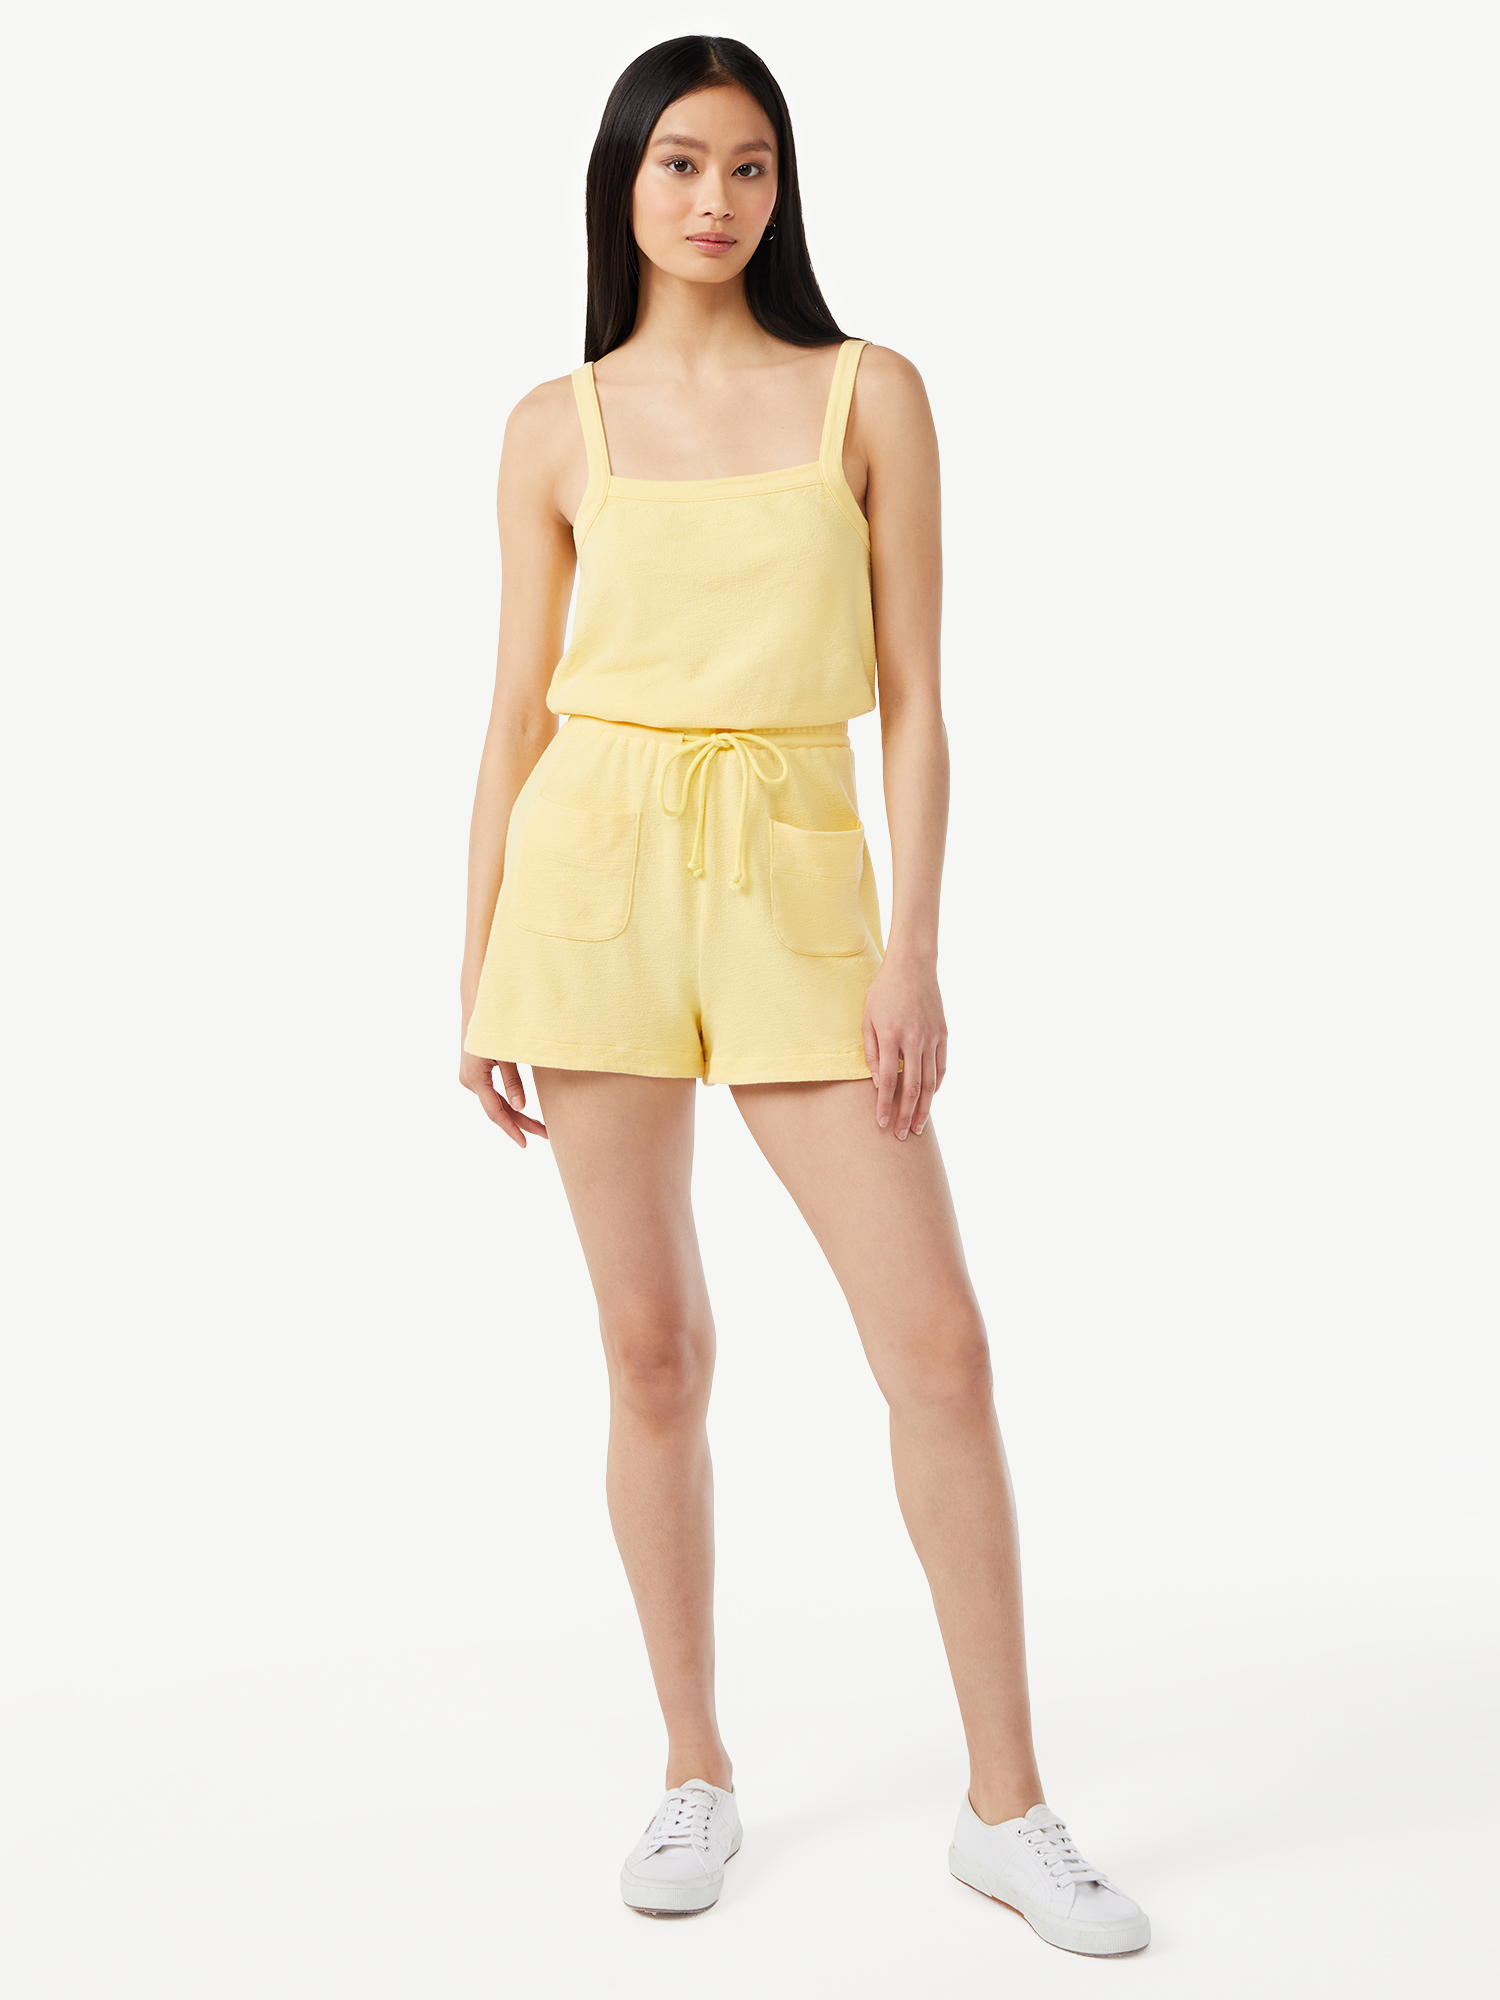 Free Assembly Women's Sleeveless Cotton Romper - image 2 of 5